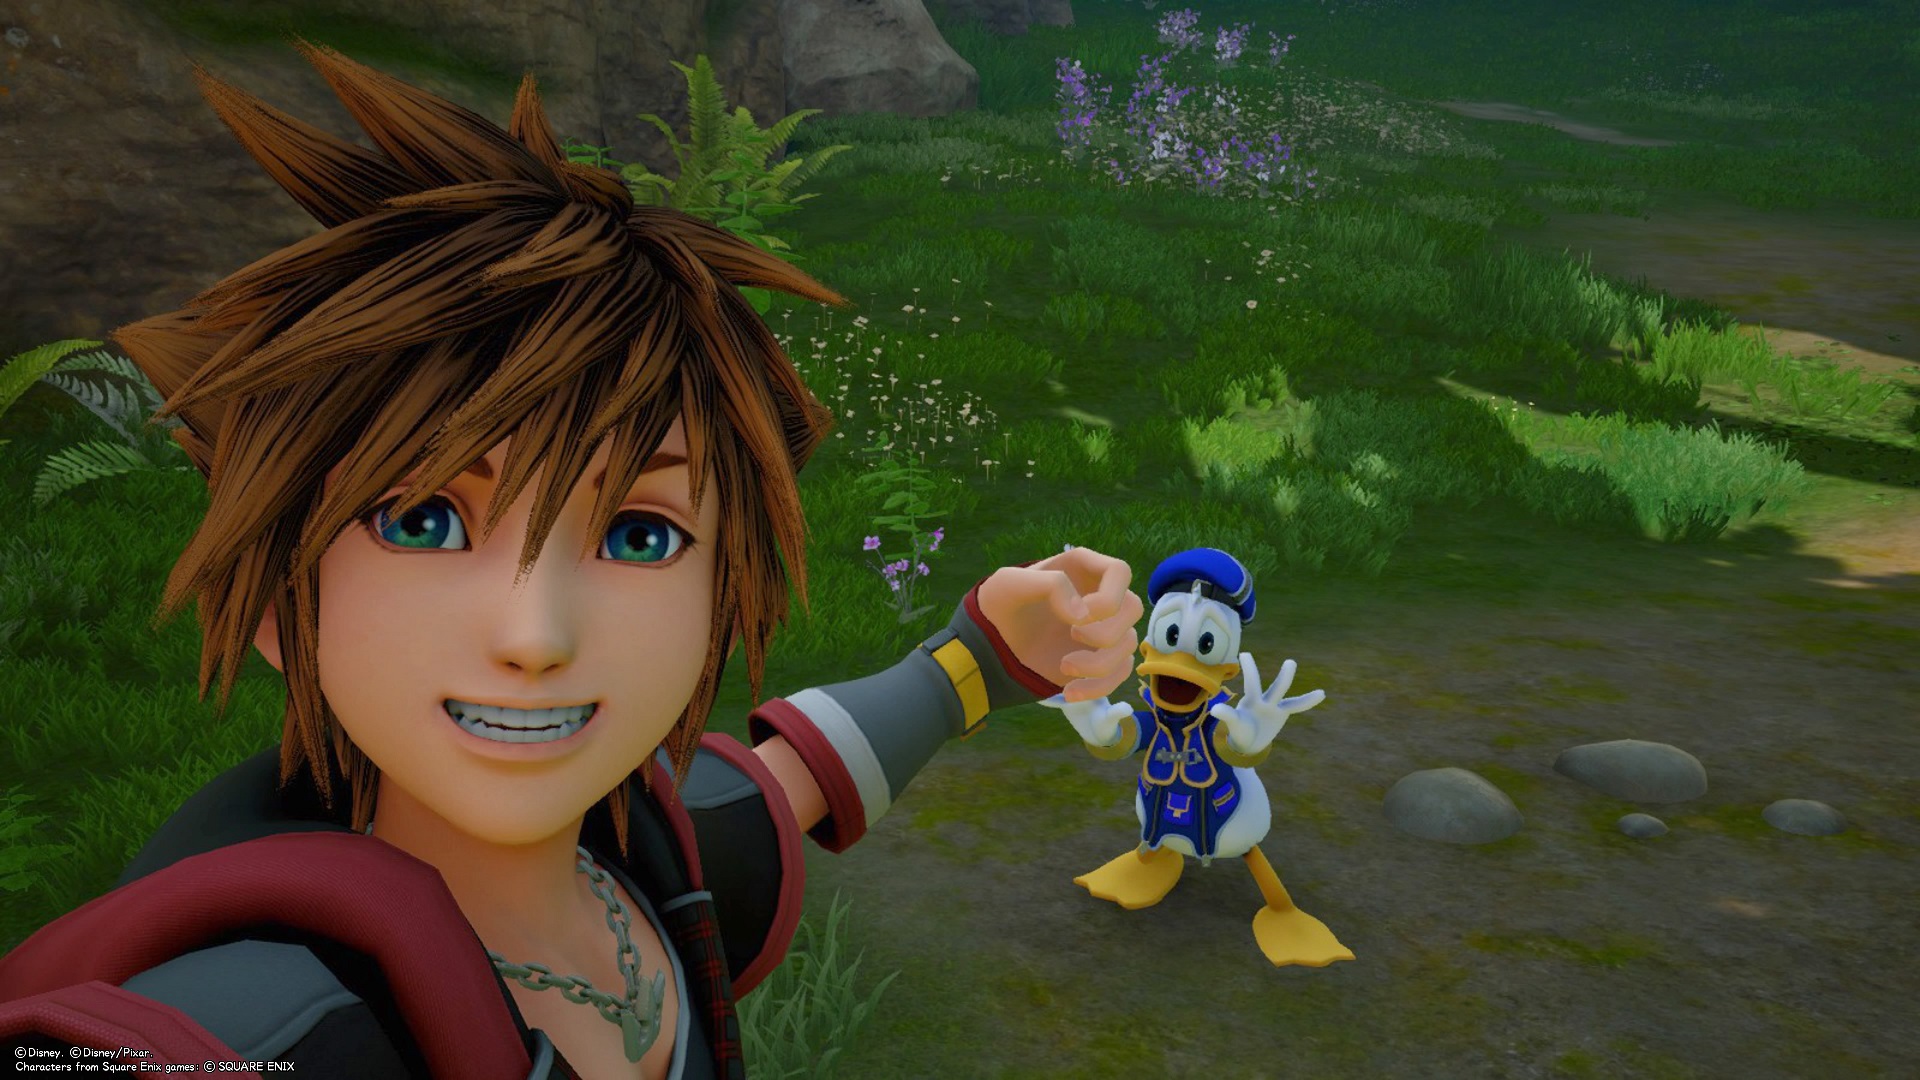 Kingdom Hearts 3 is the bestselling console game in the series